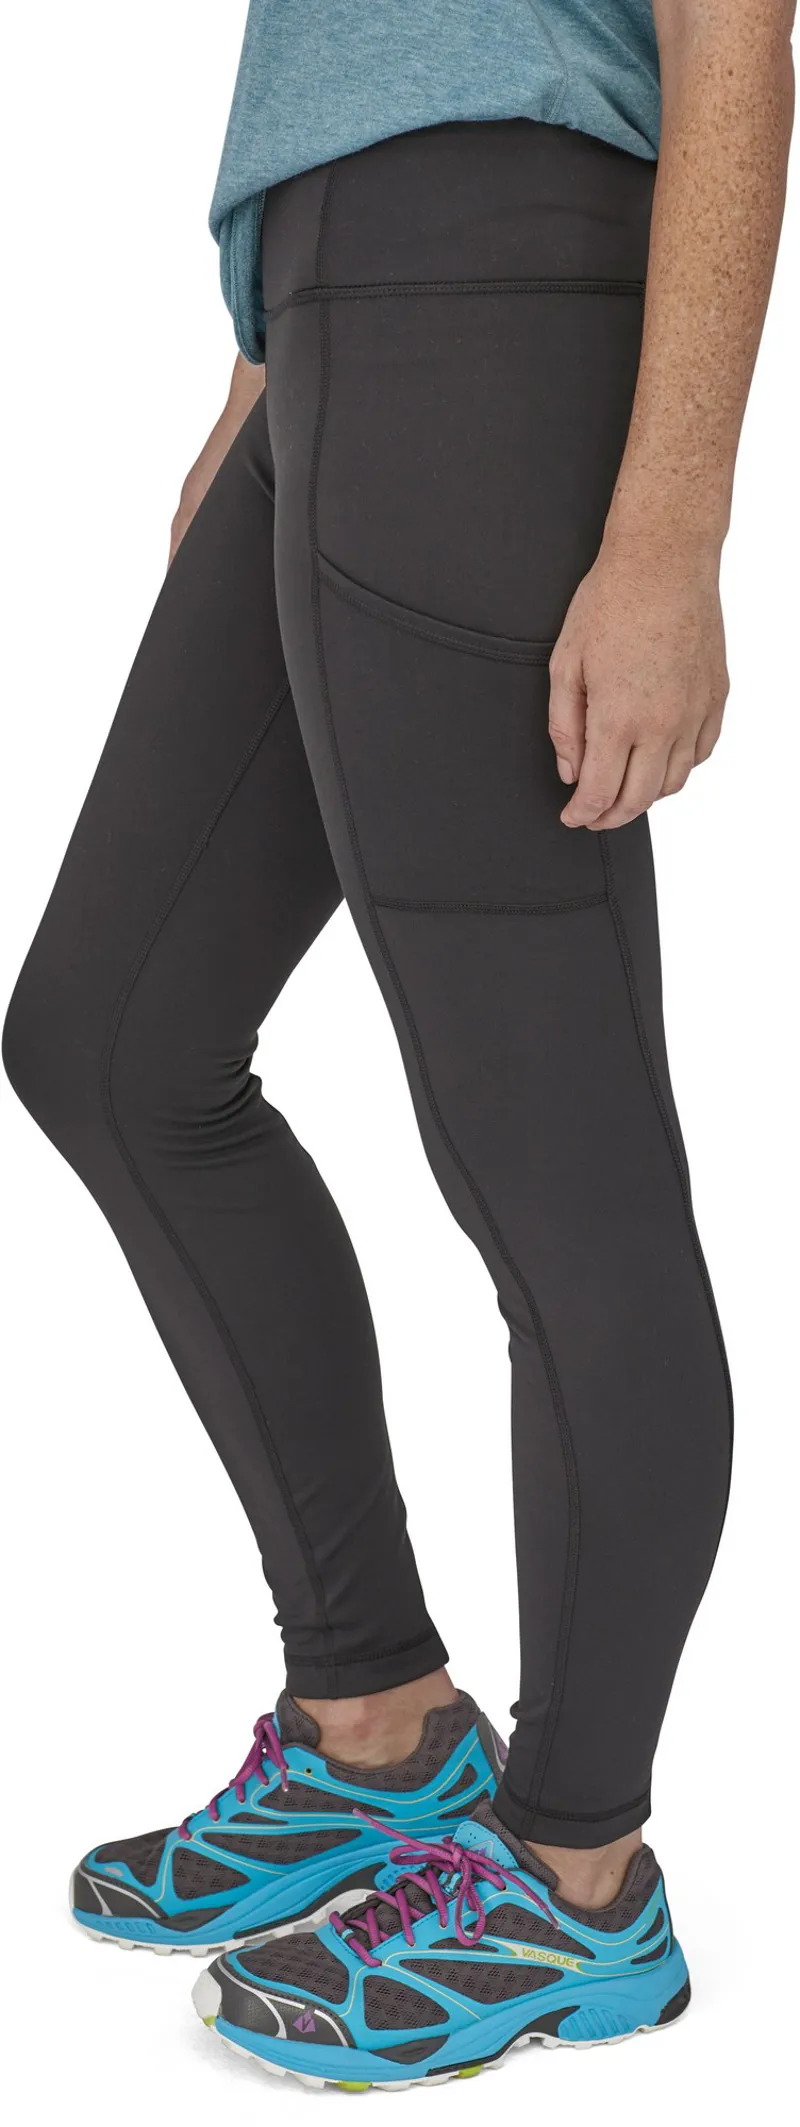 Patagonia Womens Pack Out Tights - Black